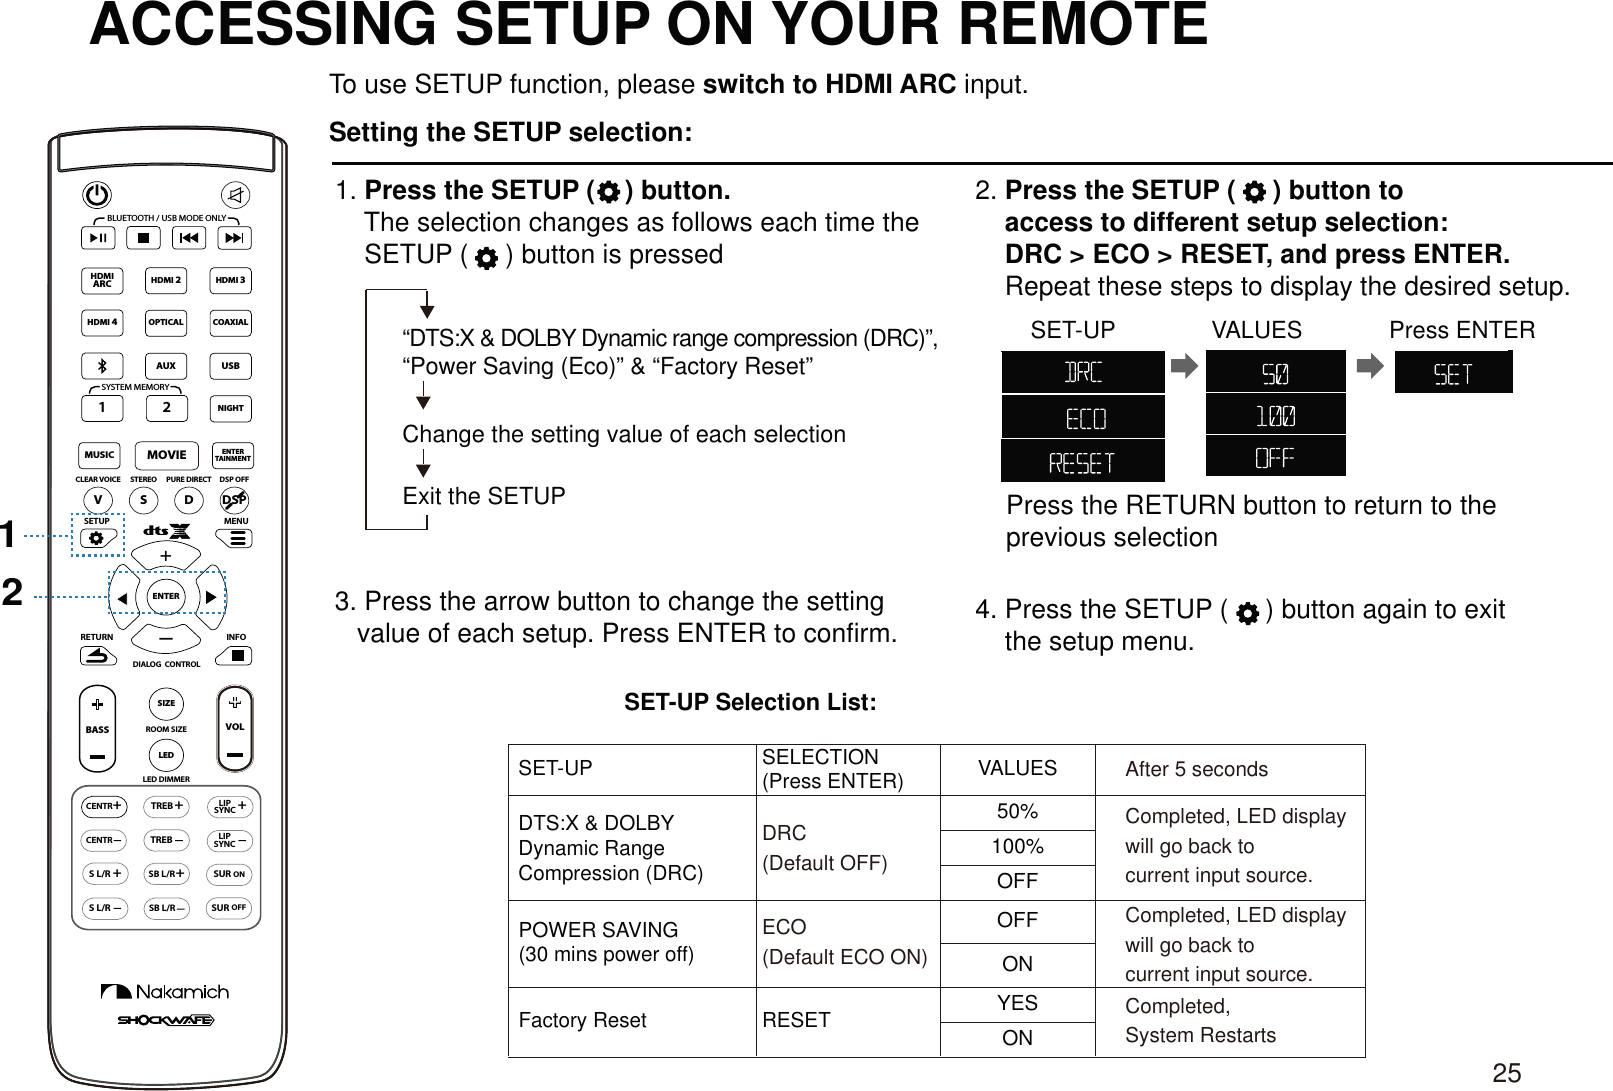 ACCESSING SETUP ON YOUR REMOTE To use SETUP function, please switch to HDMI ARC input.Setting the SETUP selection:1. Press the SETUP (    ) button.    The selection changes as follows each time the     SETUP (     ) button is pressed“DTS:X &amp; DOLBY Dynamic range compression (DRC)”,Change the setting value of each selection2. Press the SETUP (     ) button to     access to different setup selection:     DRC &gt; ECO &gt; RESET, and press ENTER.    Repeat these steps to display the desired setup.3. Press the arrow button to change the setting    value of each setup. Press ENTER to confirm. 4. Press the SETUP (     ) button again to exit     the setup menu.CENTR+++LEDSIZEVSDCLEAR VOICESETUPRETURN INFOLED DIMMERVOLMENUENTERSTEREO PURE DIRECT DSP OFF+TREBCENTRONSURSUROFFTREB+LIPSYNC+SB L/RSB L/R+S L/RS L/RLIPSYNCBLUETOOTH / USB MODE ONLYSYSTEM MEMORYBASSDSPROOM SIZEDIALOG  CONTROLHDMI 2HDMI 3MOVIEENTERTAINMENTMUSICOPTICAL2AUXHDMIARCHDMI 4COAXIALUSB1NIGHT12Exit the SETUP   Press the RETURN button to return to the   previous selectionSET-UP VALUES Press ENTERSET-UP Selection List:SET-UP SELECTION(Press ENTER) VALUESOFFOFFONYES50%100%POWER SAVING(30 mins power off)Factory Reset RESET“Power Saving (Eco)” &amp; “Factory Reset”DTS:X &amp; DOLBYDynamic Range Compression (DRC)DRC(Default OFF)ECO(Default ECO ON)After 5 secondsONCompleted, LED display will go back to current input source.Completed, LED display will go back to current input source.Completed, System Restarts25